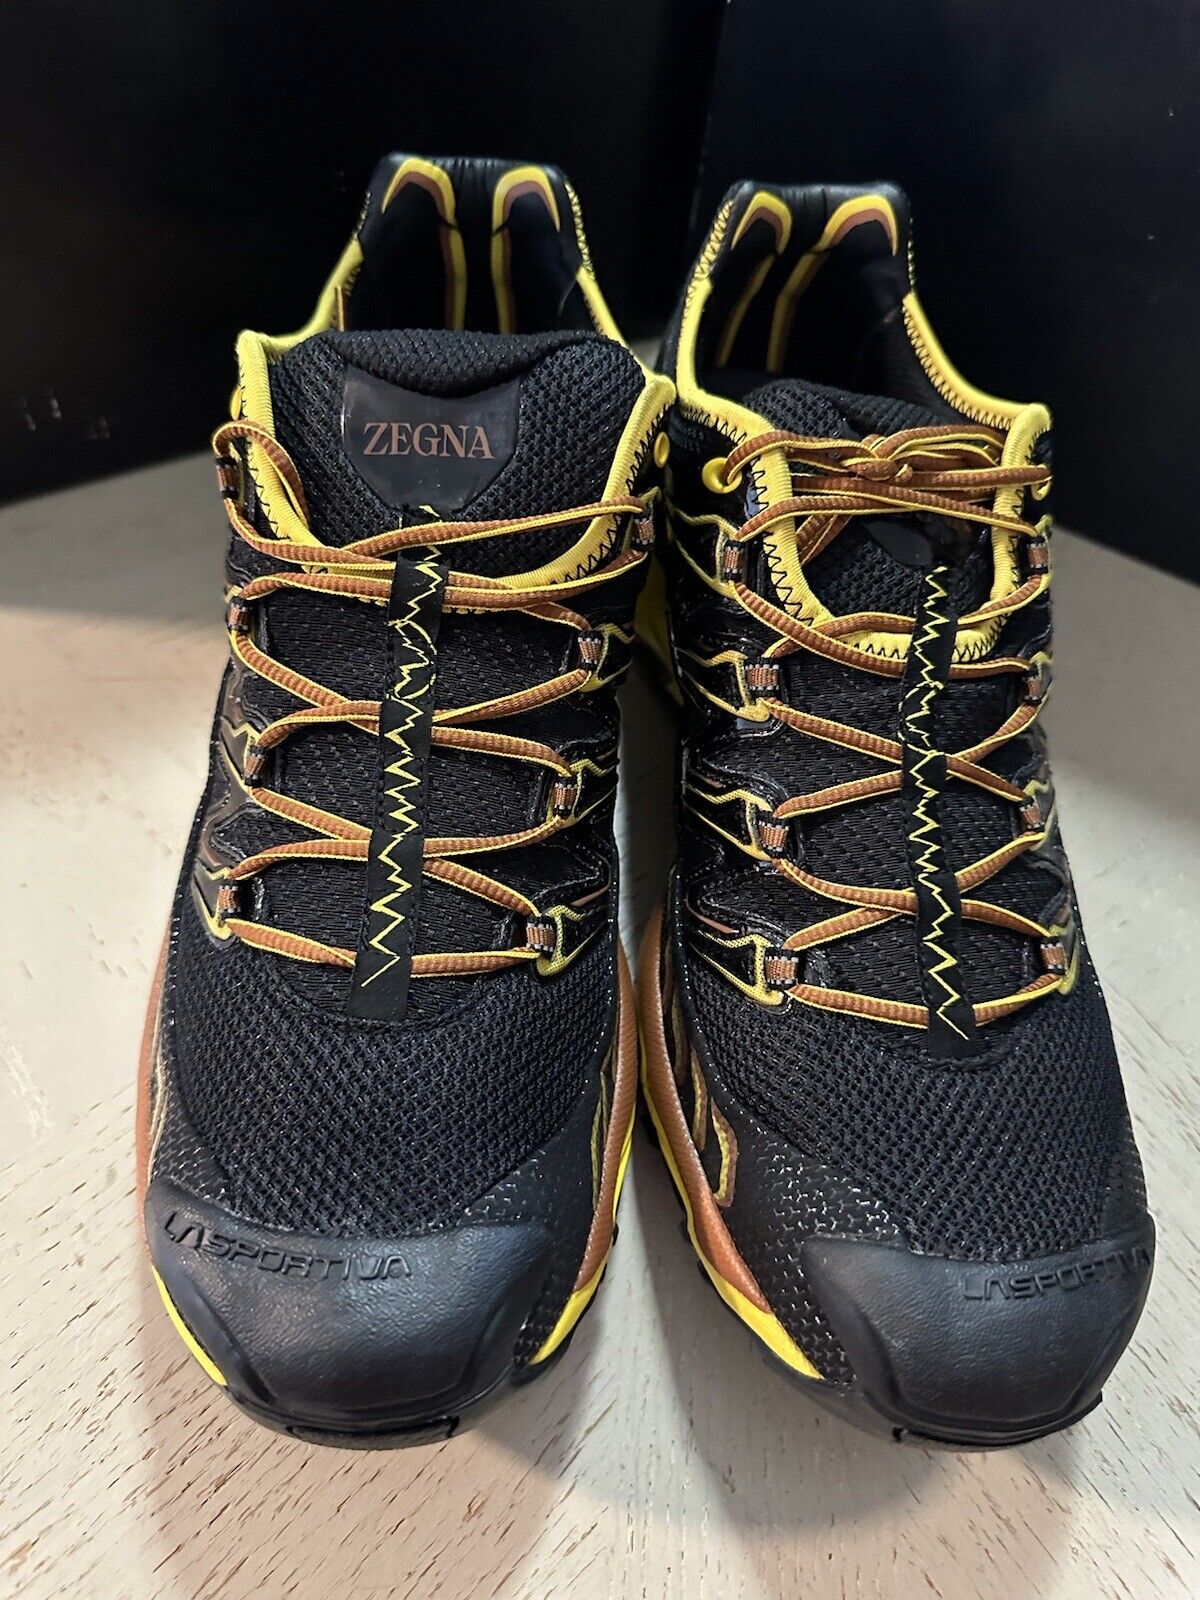 Zegna Men Sneakers Shoes Black/Yellow/Brown 9.5 US New